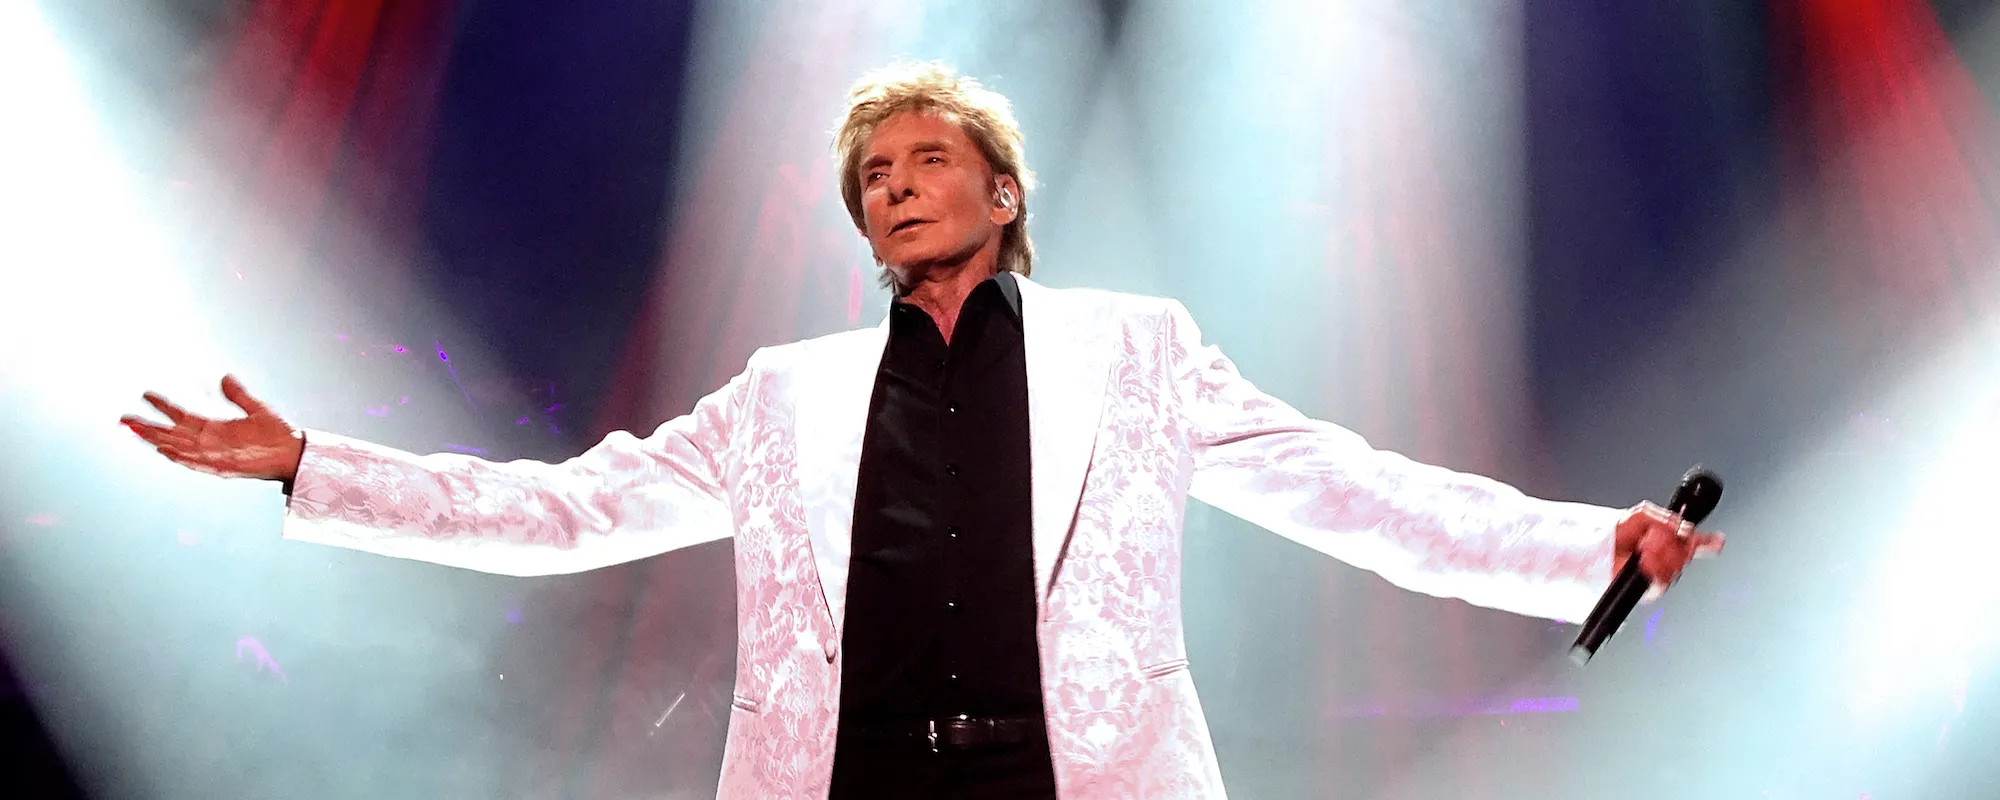 Barry Manilow to Award a Music Teacher in Each City of His 2022 Arena